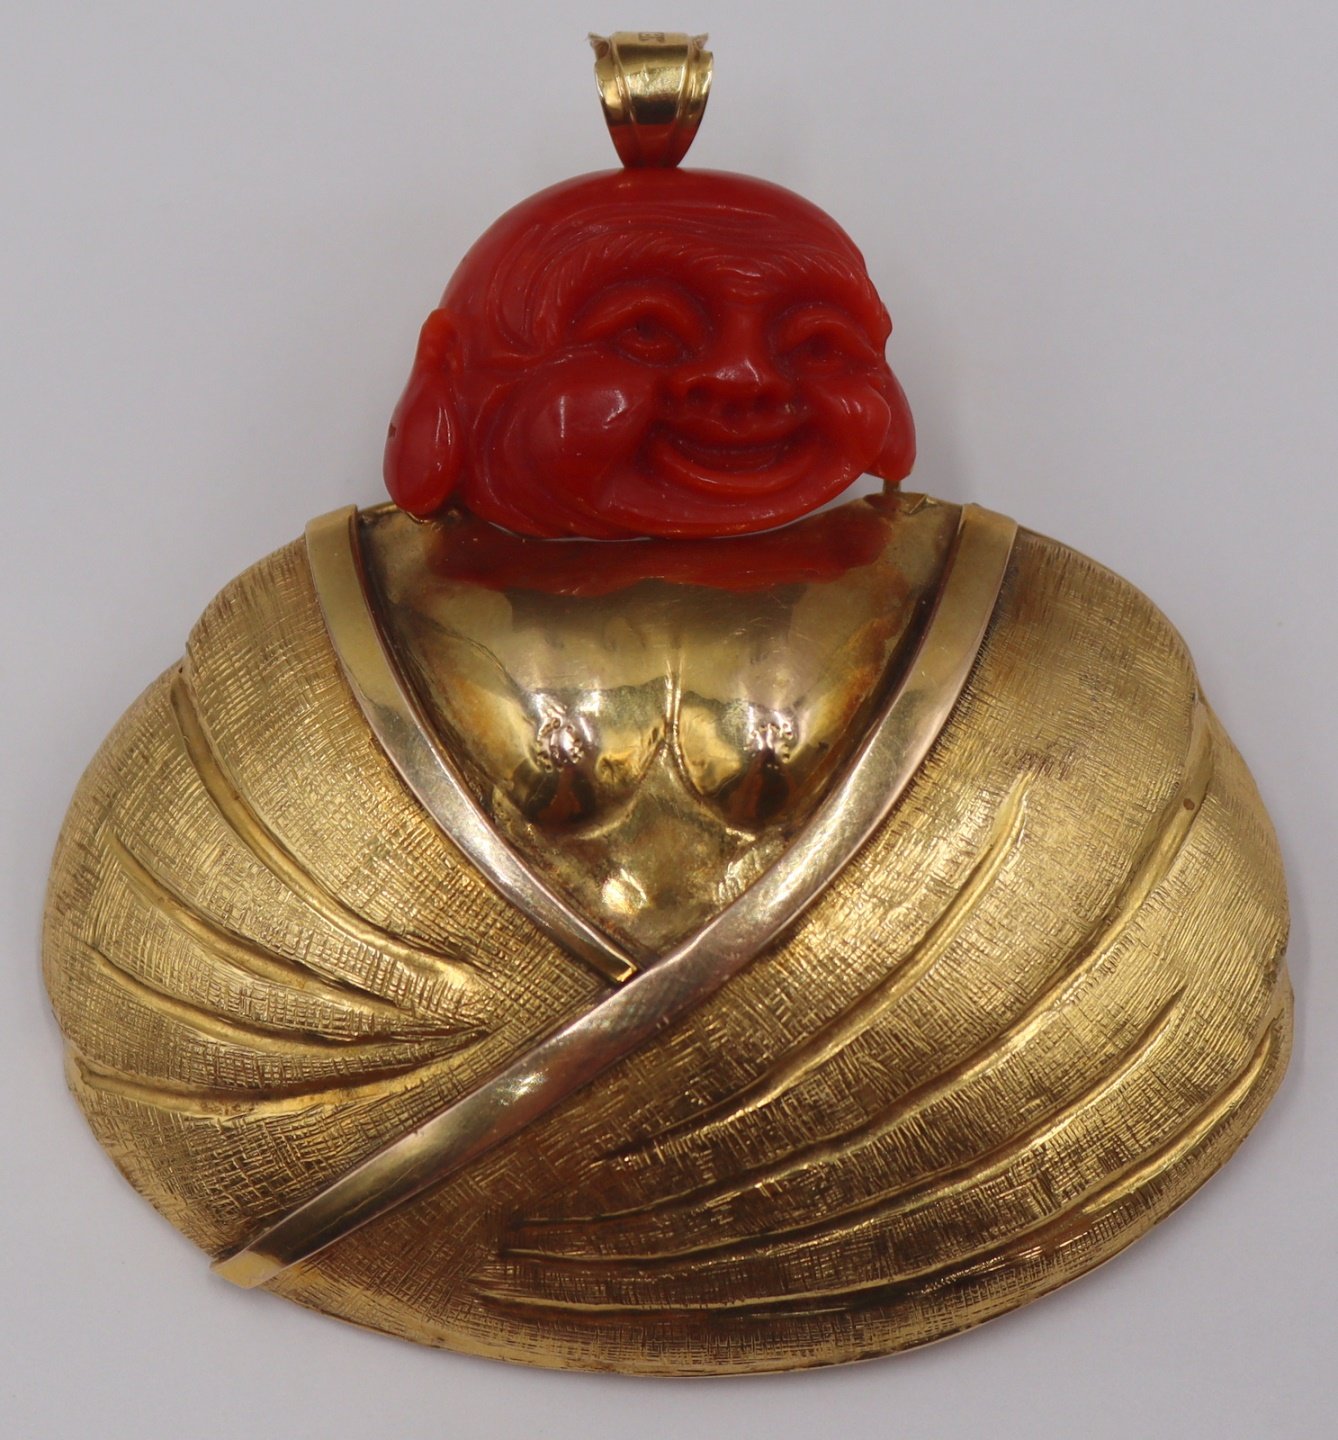 JEWELRY 14KT GOLD AND RED CORAL 3bc460